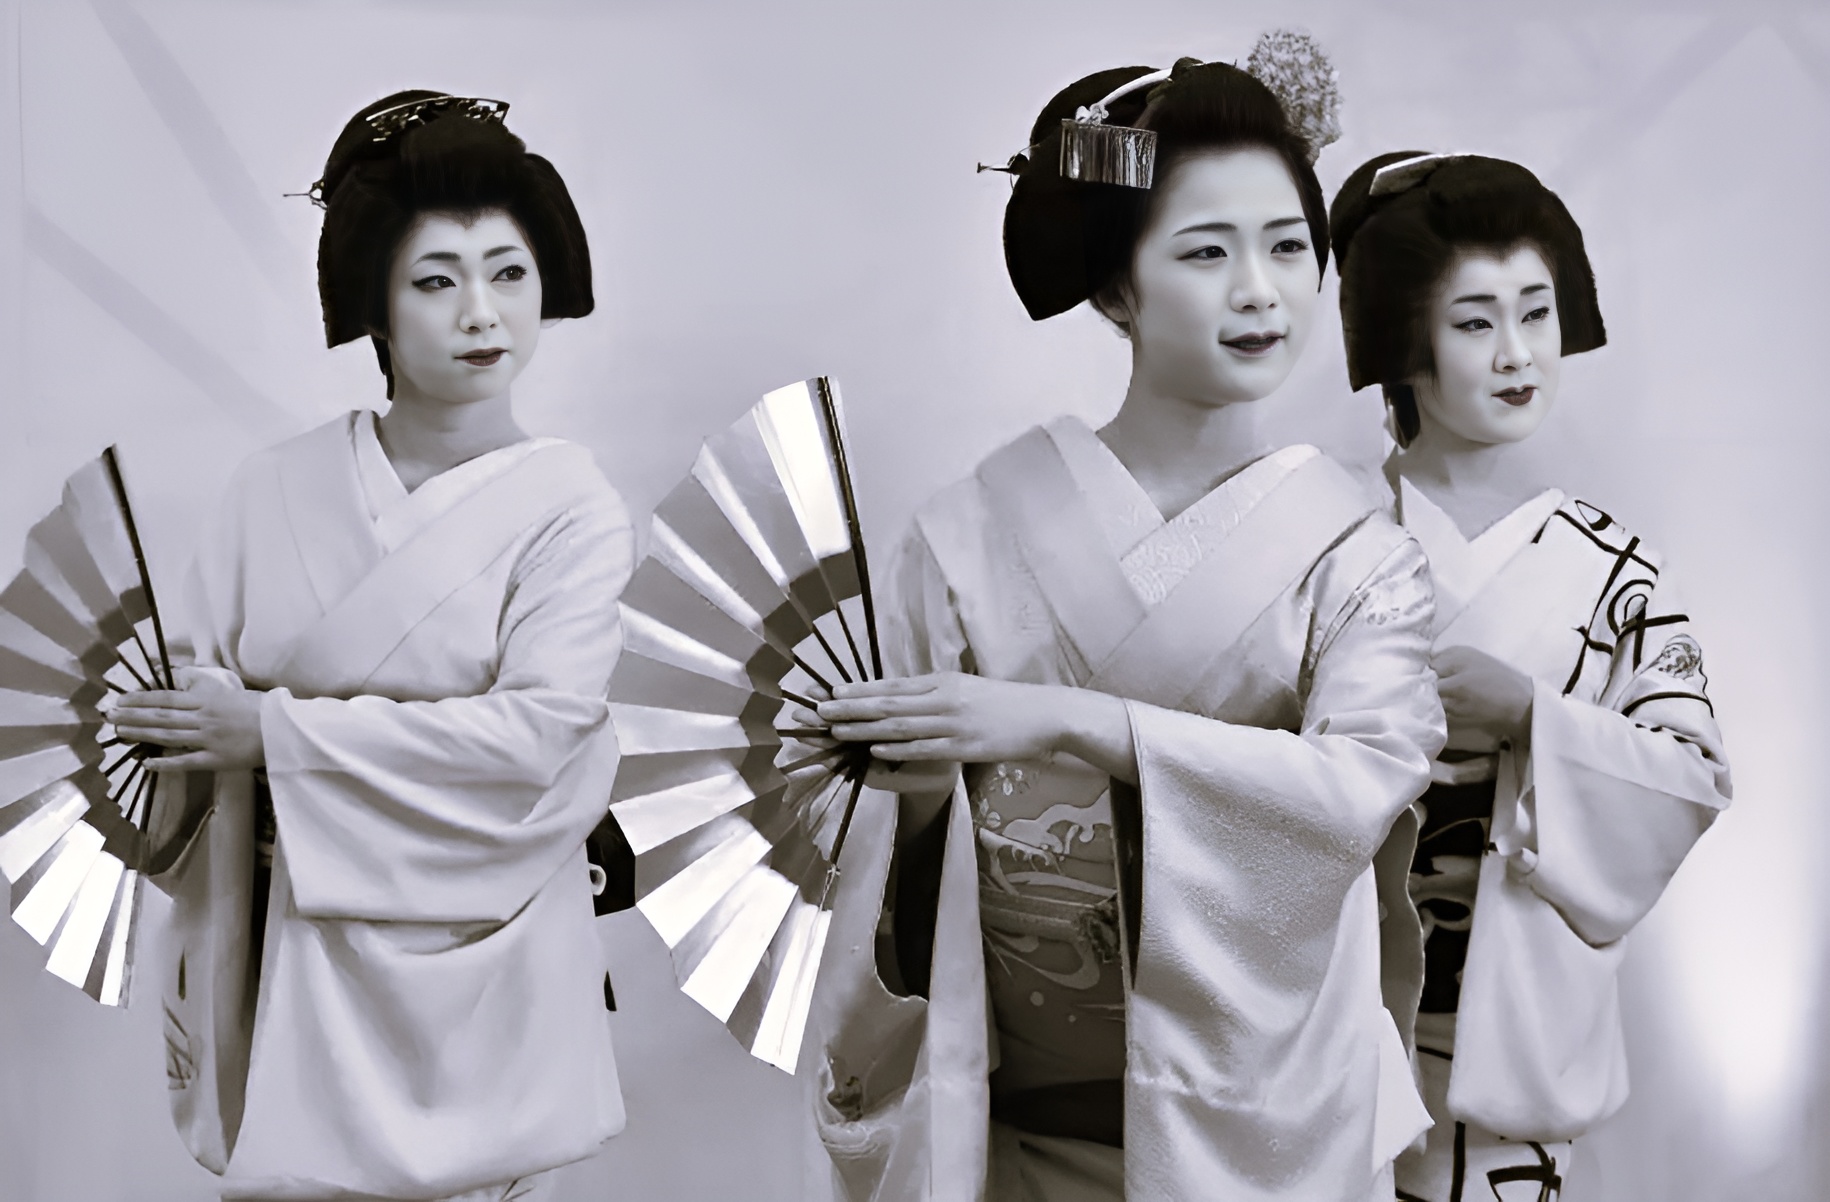 Amazing Facts About Geisha and Their Beautiful Photos